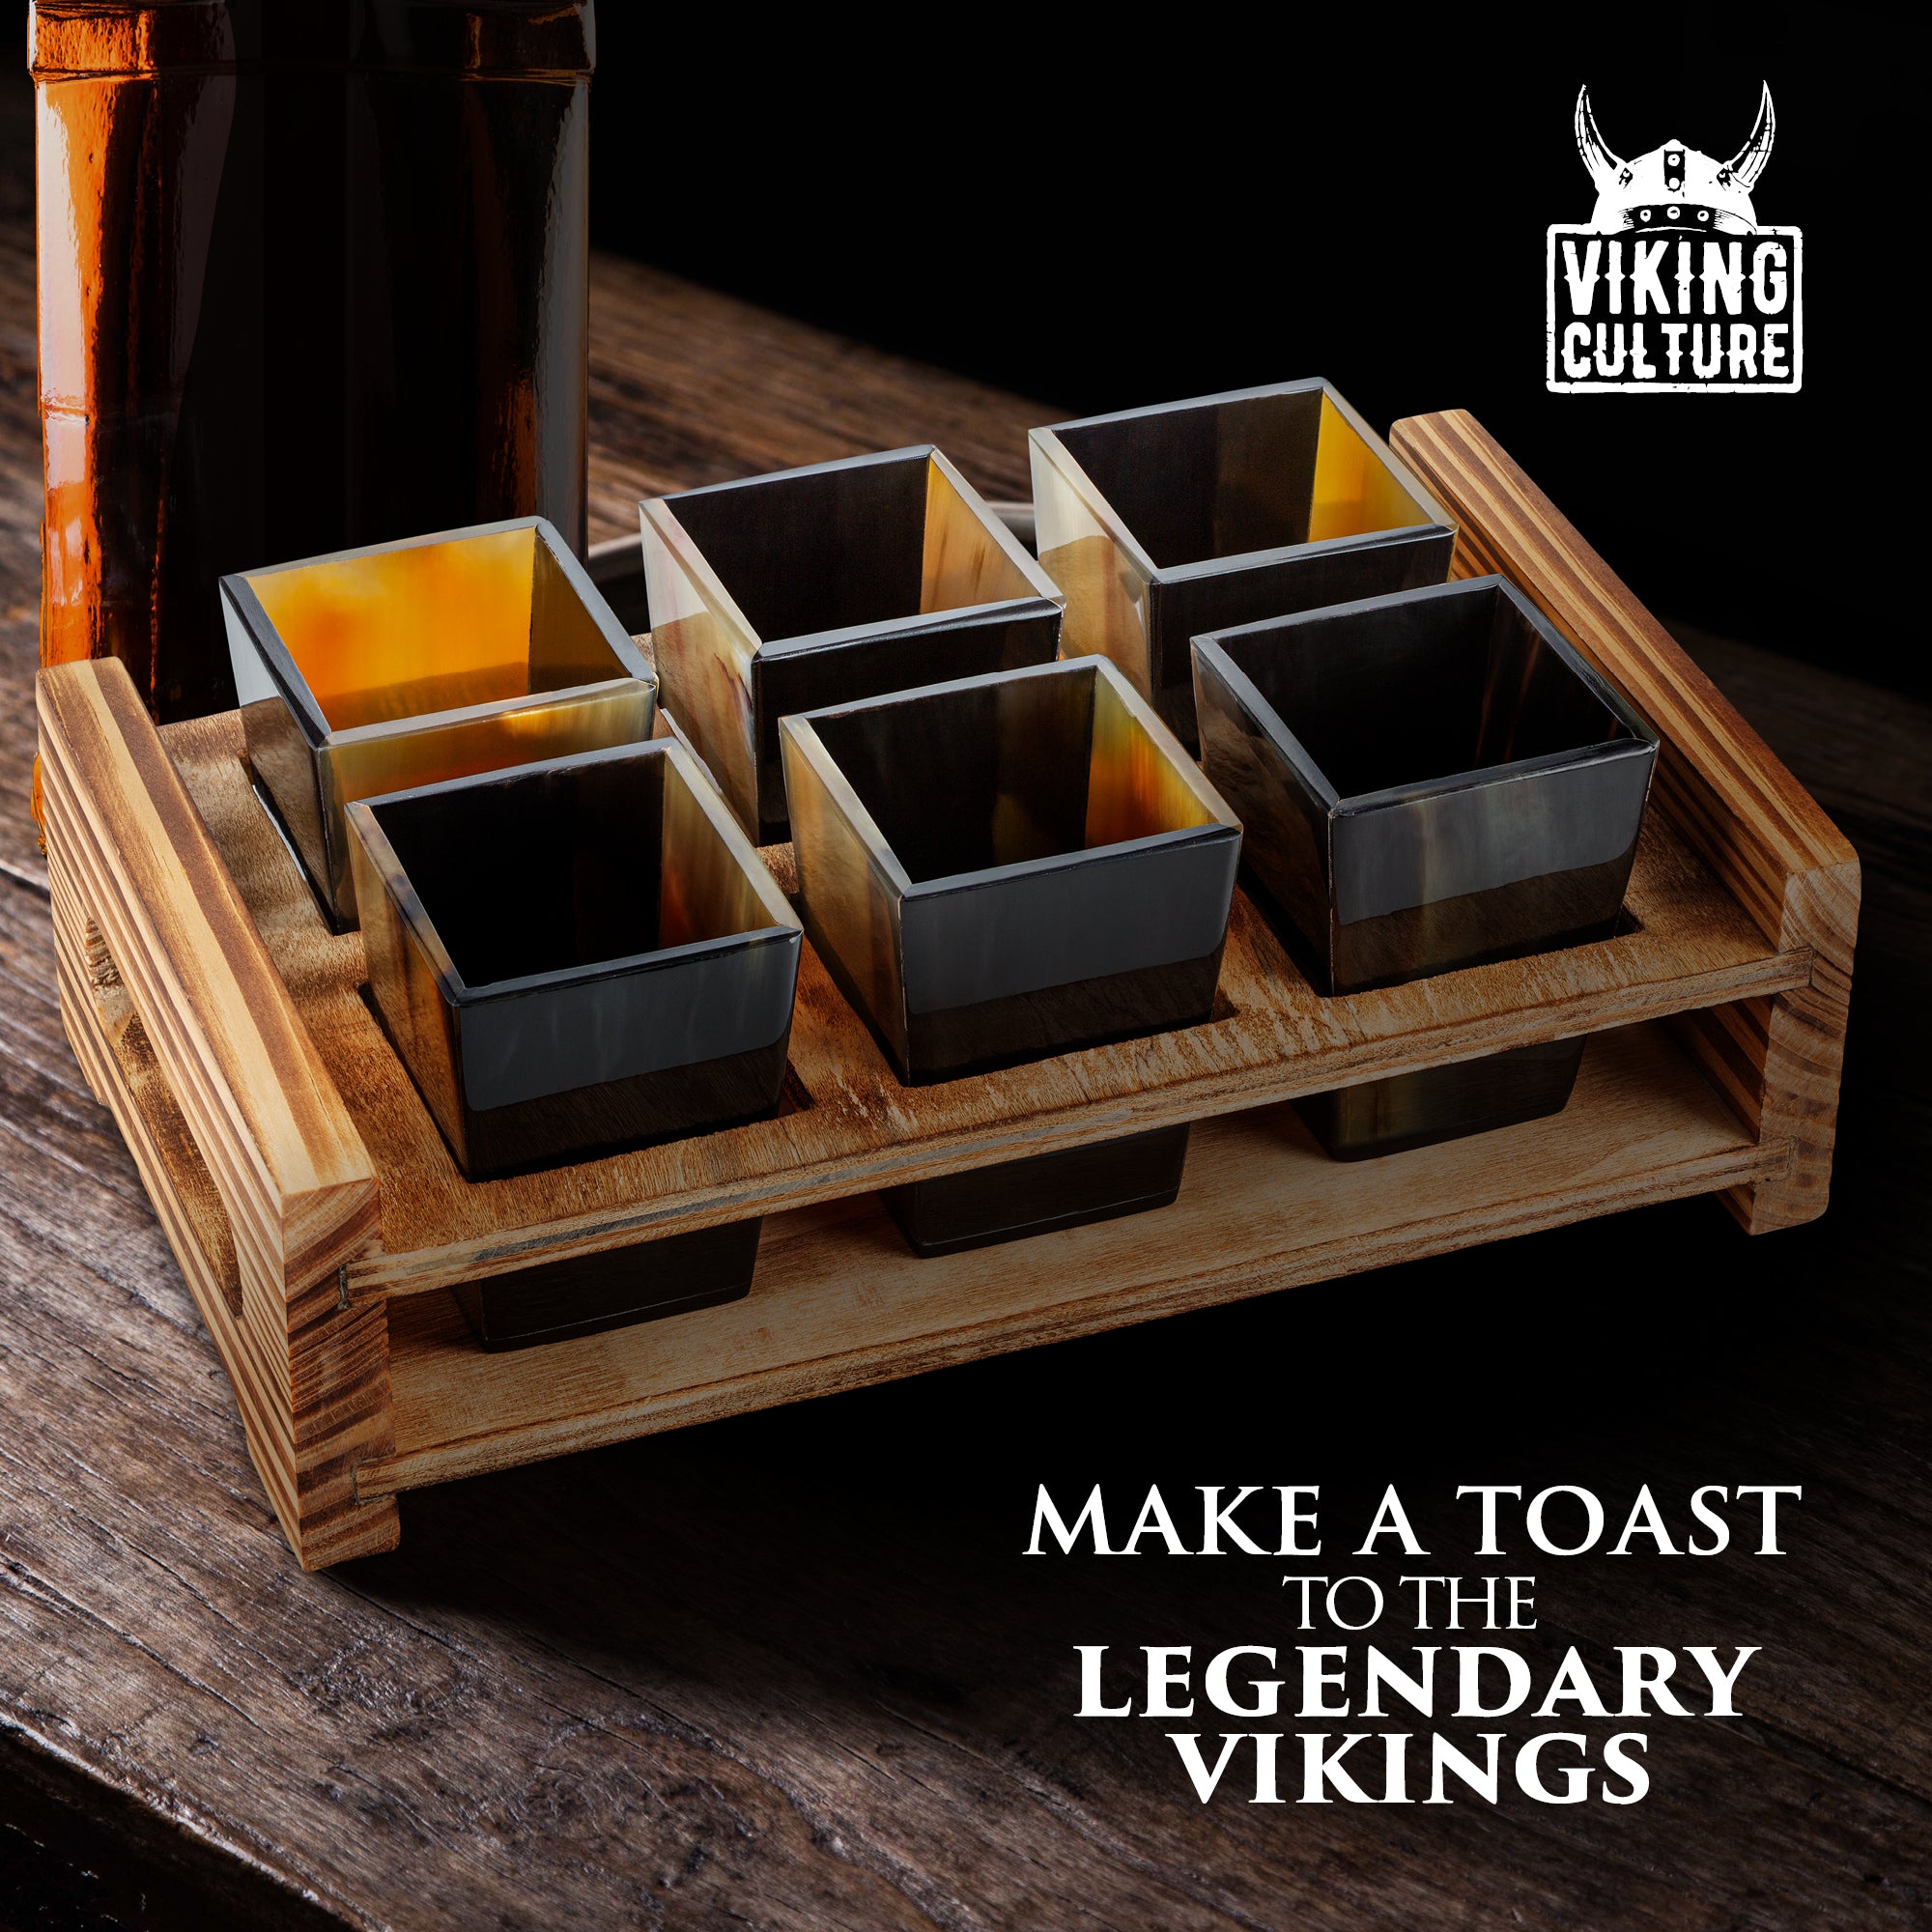 Viking Culture Horn Shot Glasses - Authentic Medieval and Nordic-Inspired Drinkware with Wooden Serving and Storage Tray - Handmade Drinking Set - Perfect for Parties, Collection and Gift - 6-Pack